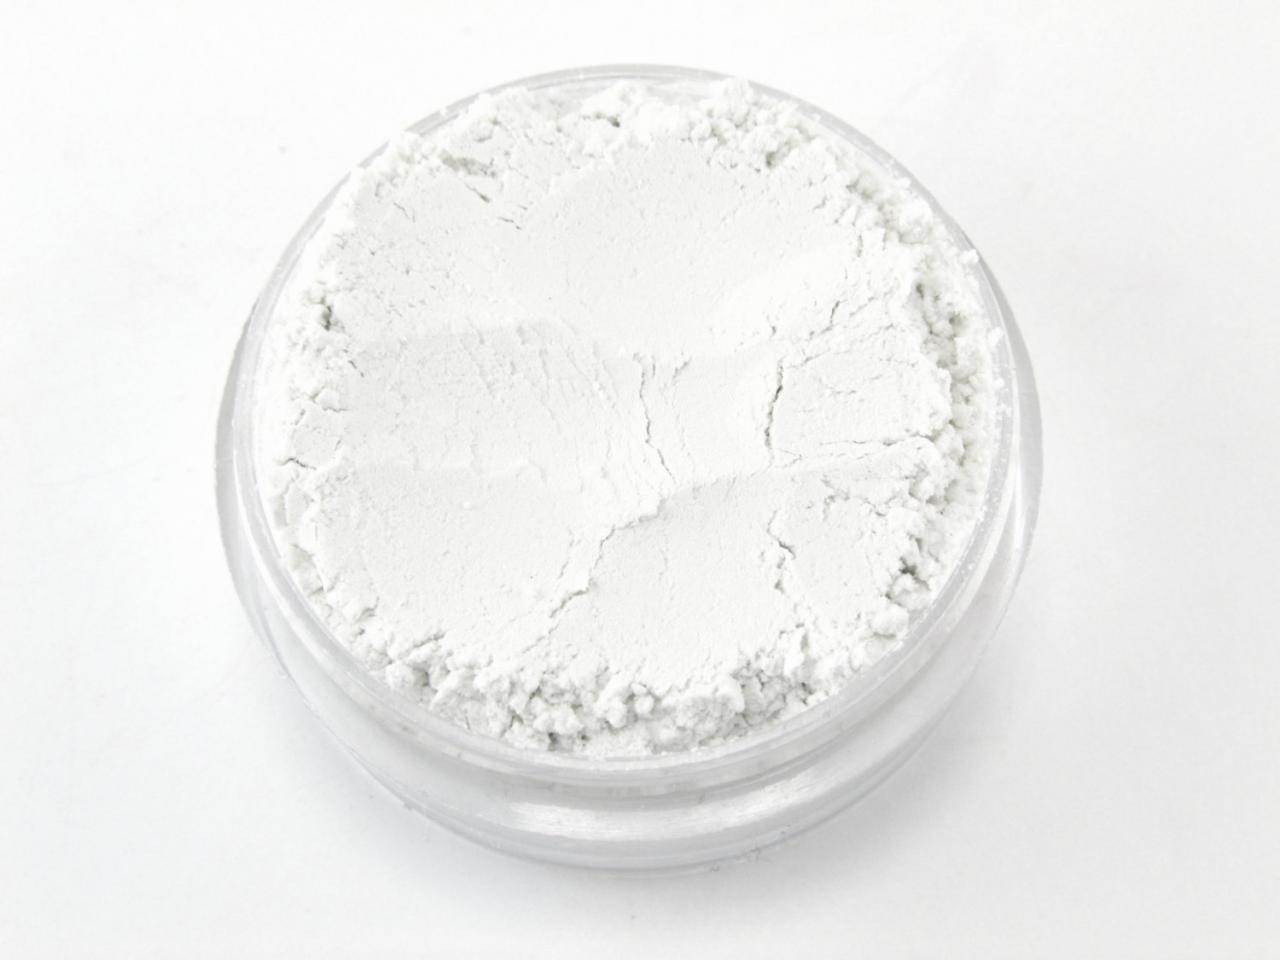 Mineral Makeup - Oil Control Powder/finisher - Matte This